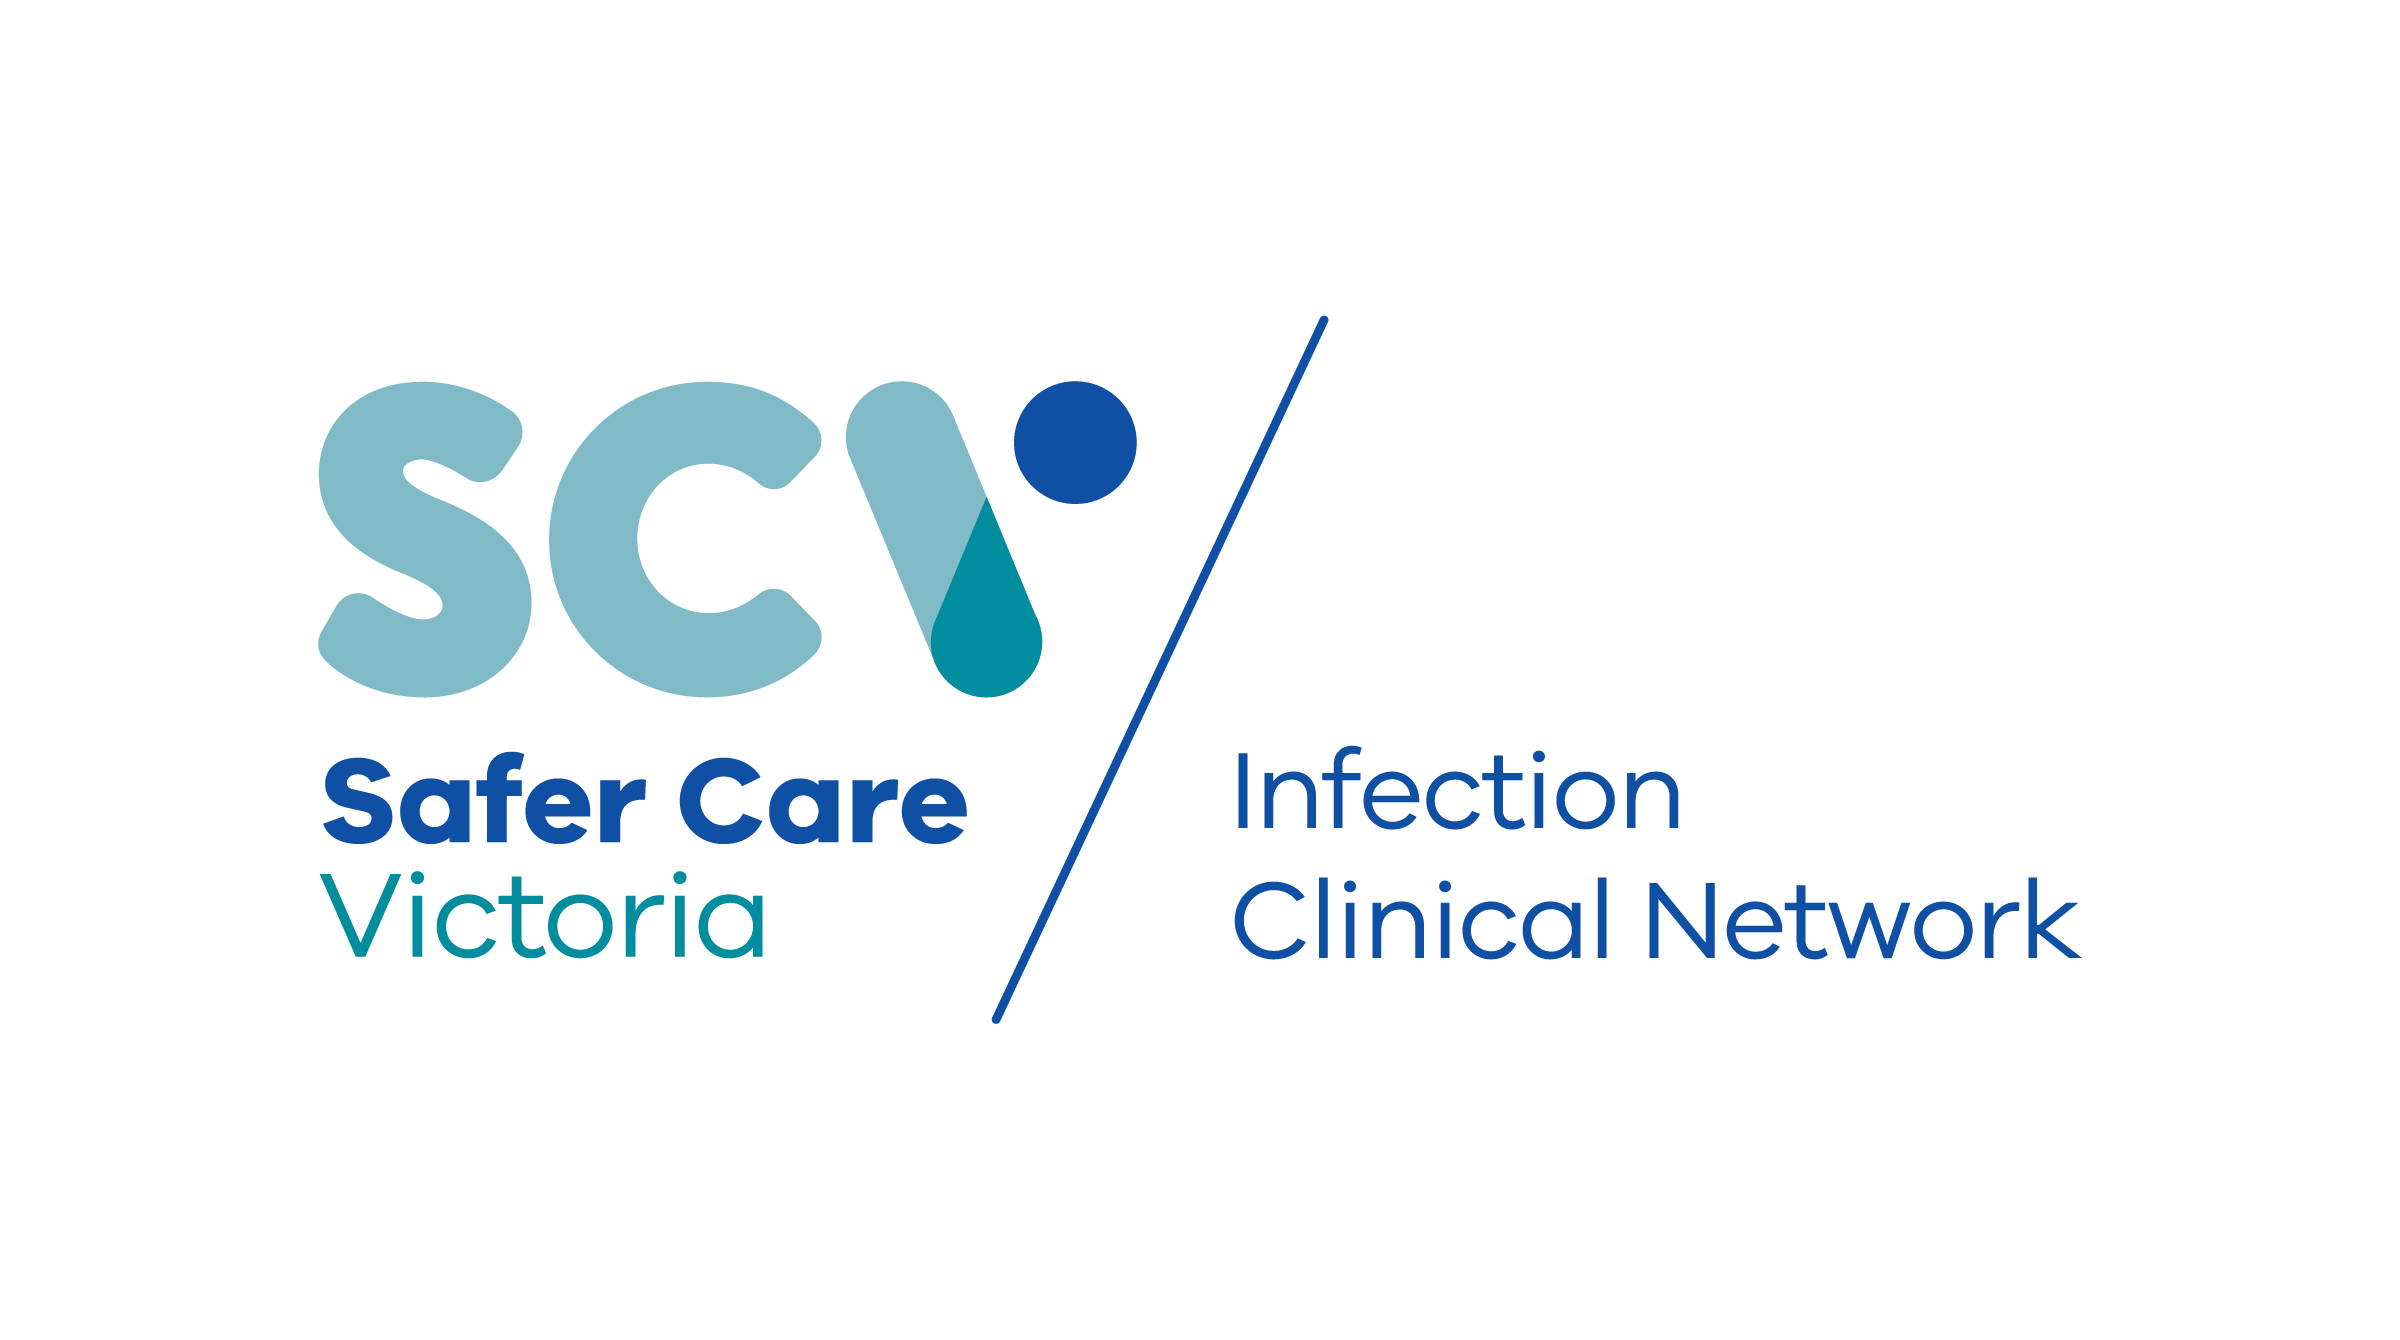 Infection Clinical Network (ICN) Forum 2019